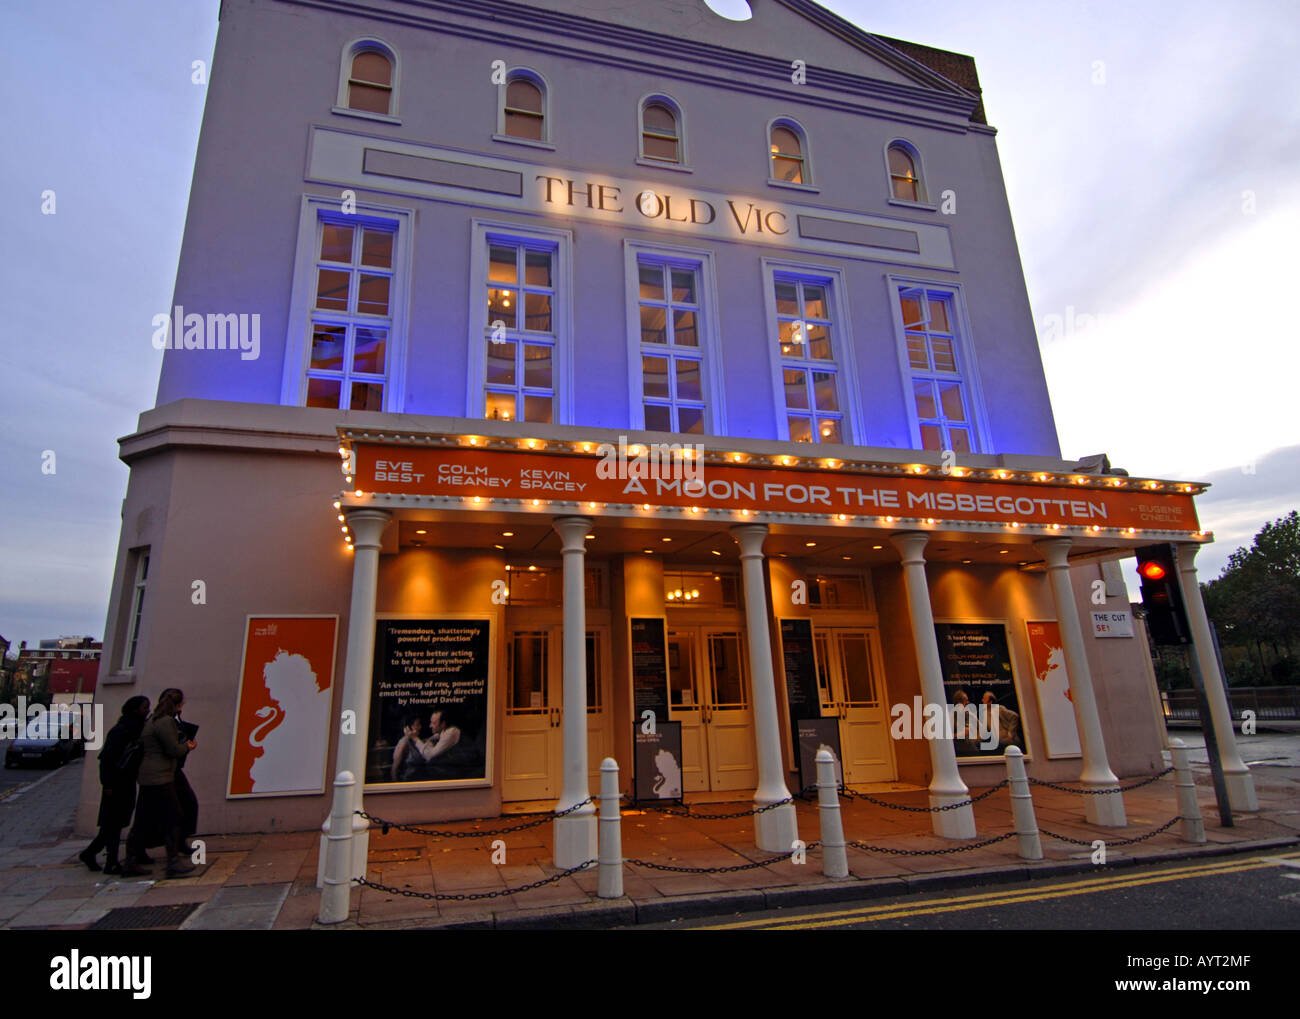 The Old Vic Theatre 14